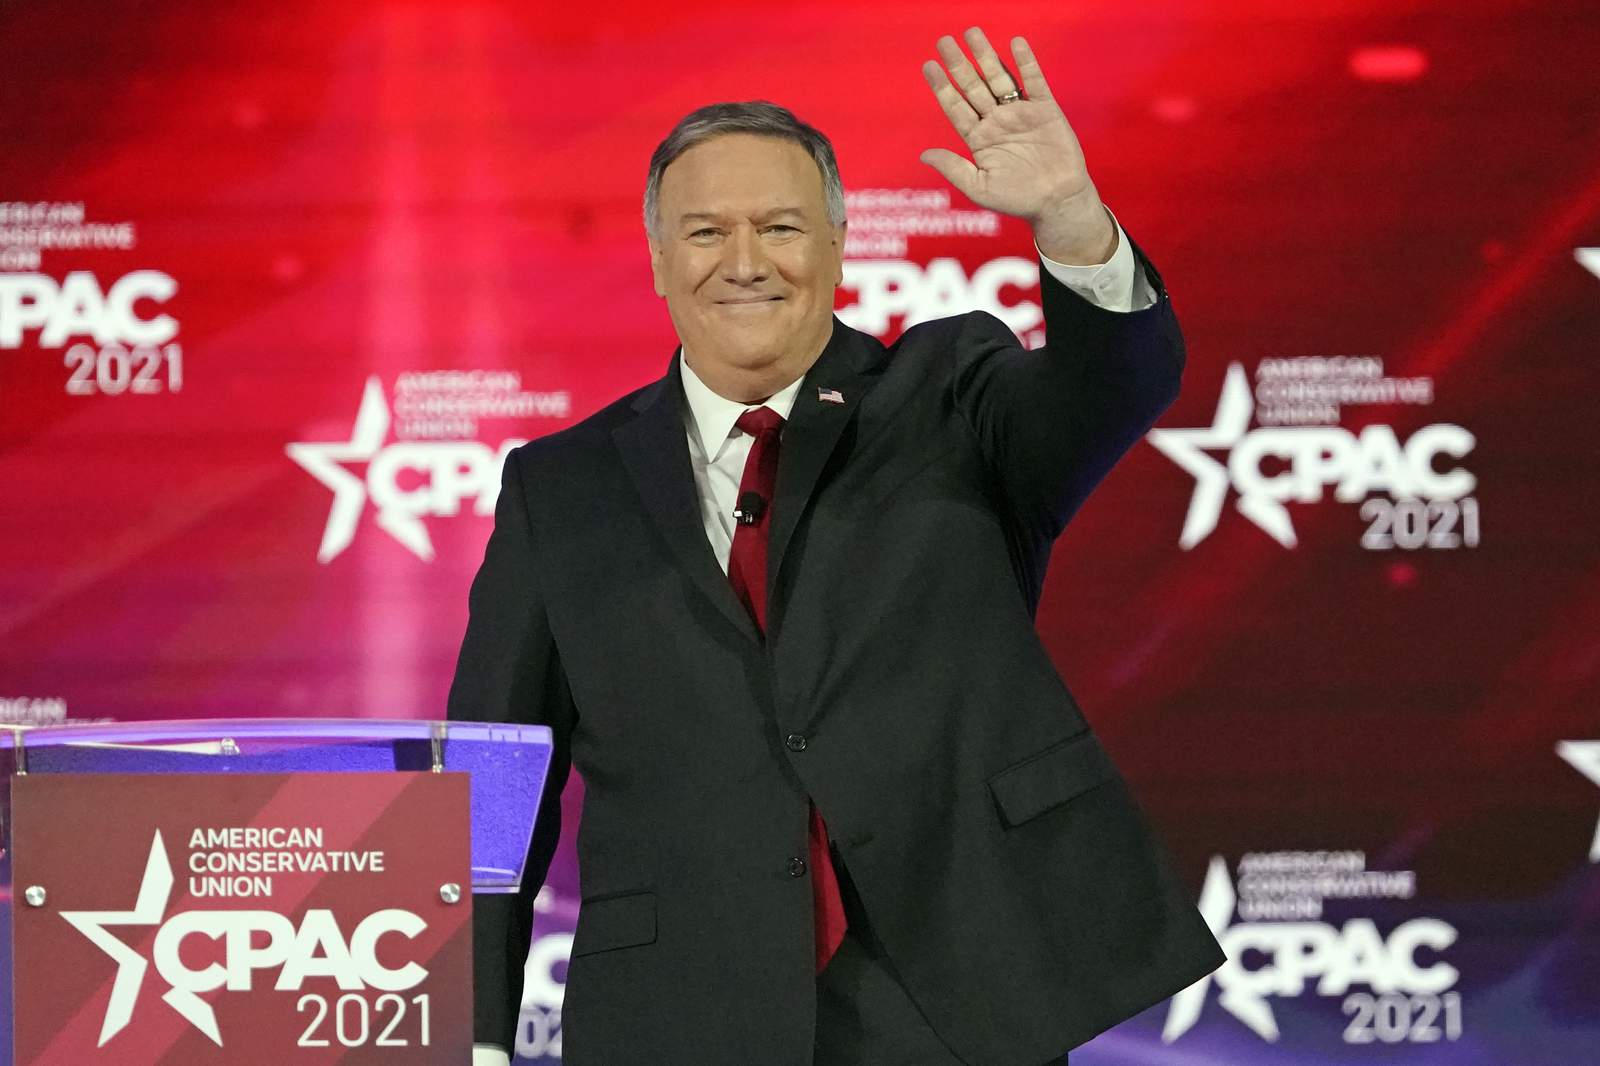 Another campaign? C-SPAN to air Iowa speech by Pompeo